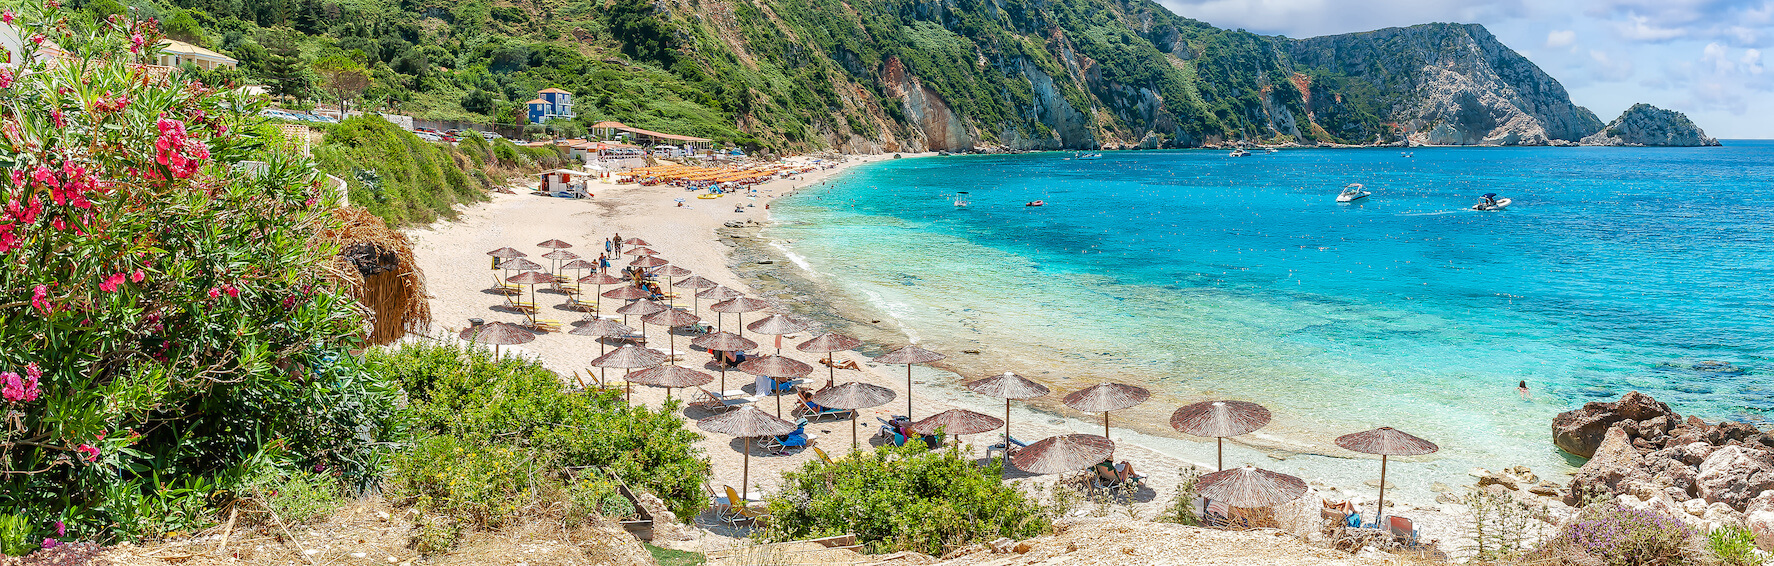 Immerse yourself in the beauty of Kefalonia's best beaches. Discover a variety of coastal paradises, from the iconic Myrtos Beach with its turquoise waters and dramatic cliffs to the secluded tranquility of Antisamos Beach. Each beach offers its own unique charm, whether it's the soft golden sands of Makris Gialos or the rugged beauty of Xi Beach. Experience the crystal-clear waters, stunning landscapes, and sun-soaked shores that make Kefalonia's best beaches truly exceptional.